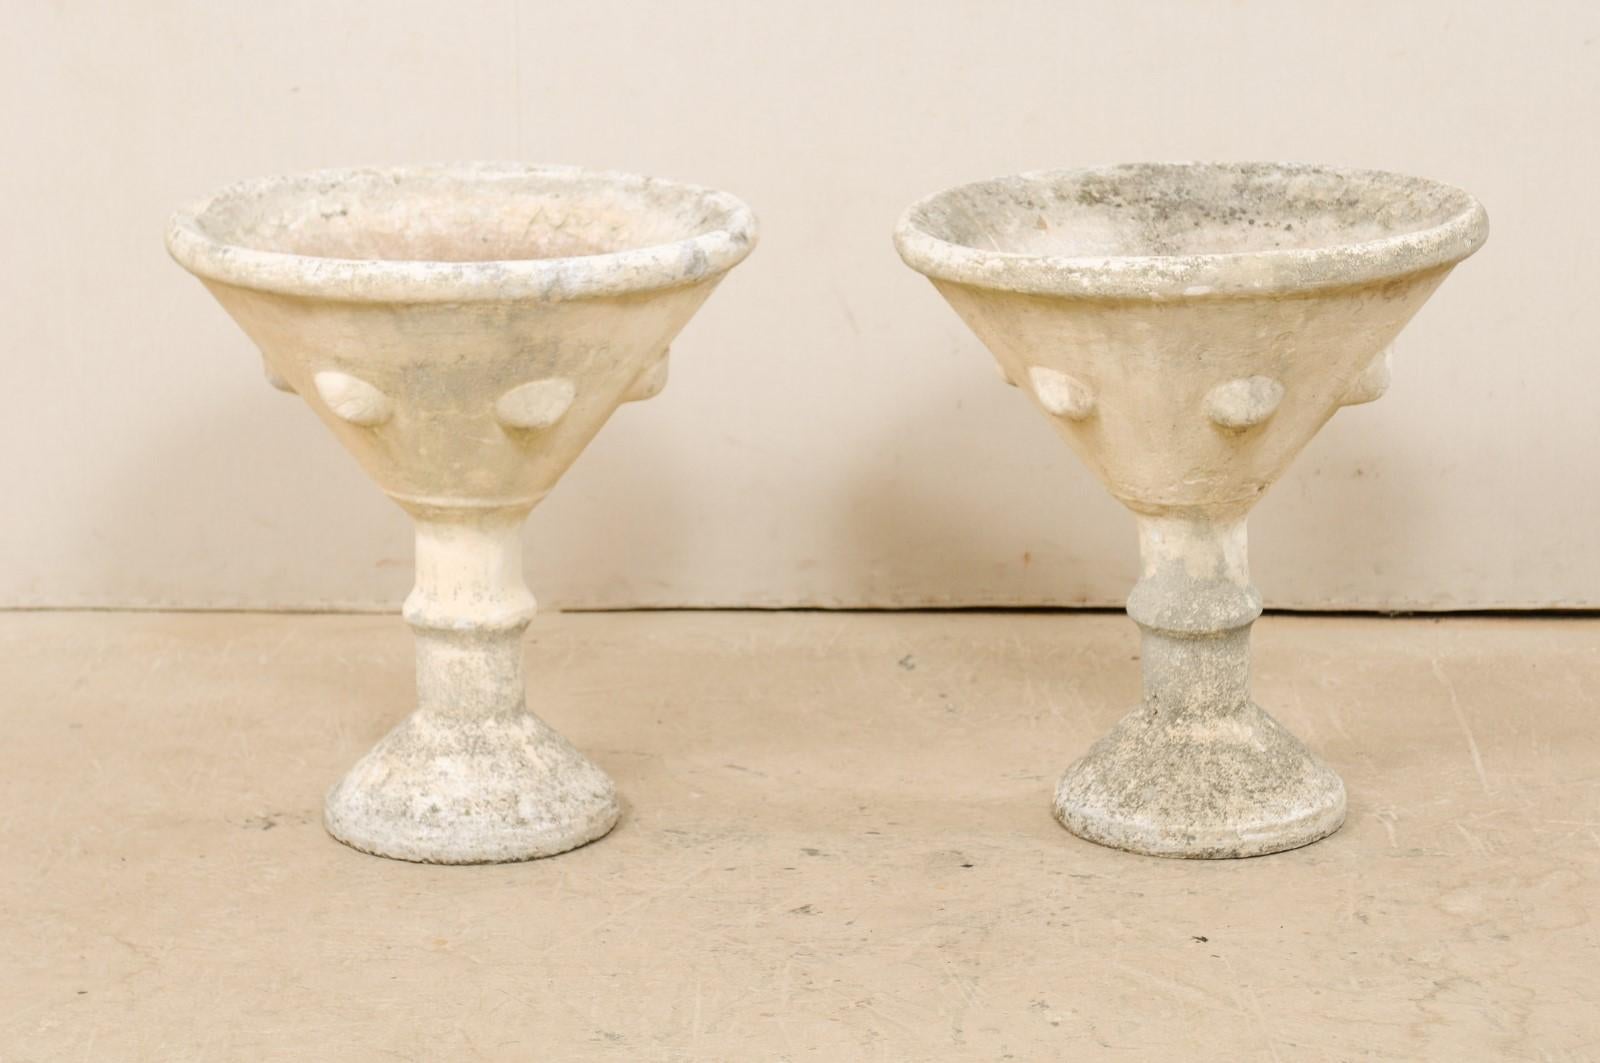 A pair of French tall cast stone outdoor planters from the mid-20th century. This pair of vintage French planters have been made of cast stone and have a playful, 